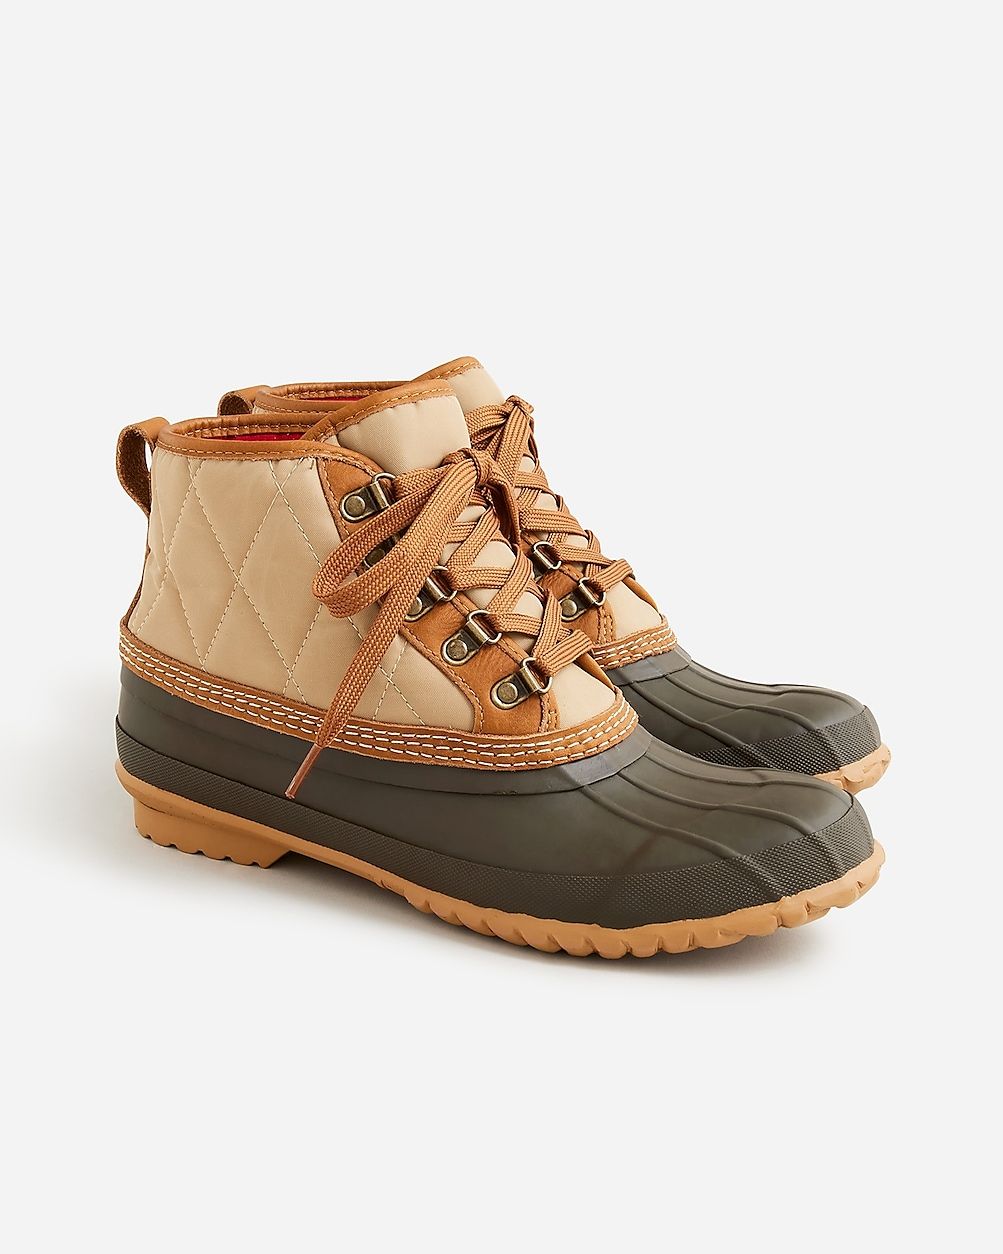 Heritage duck boots in quilted nylon | J.Crew US